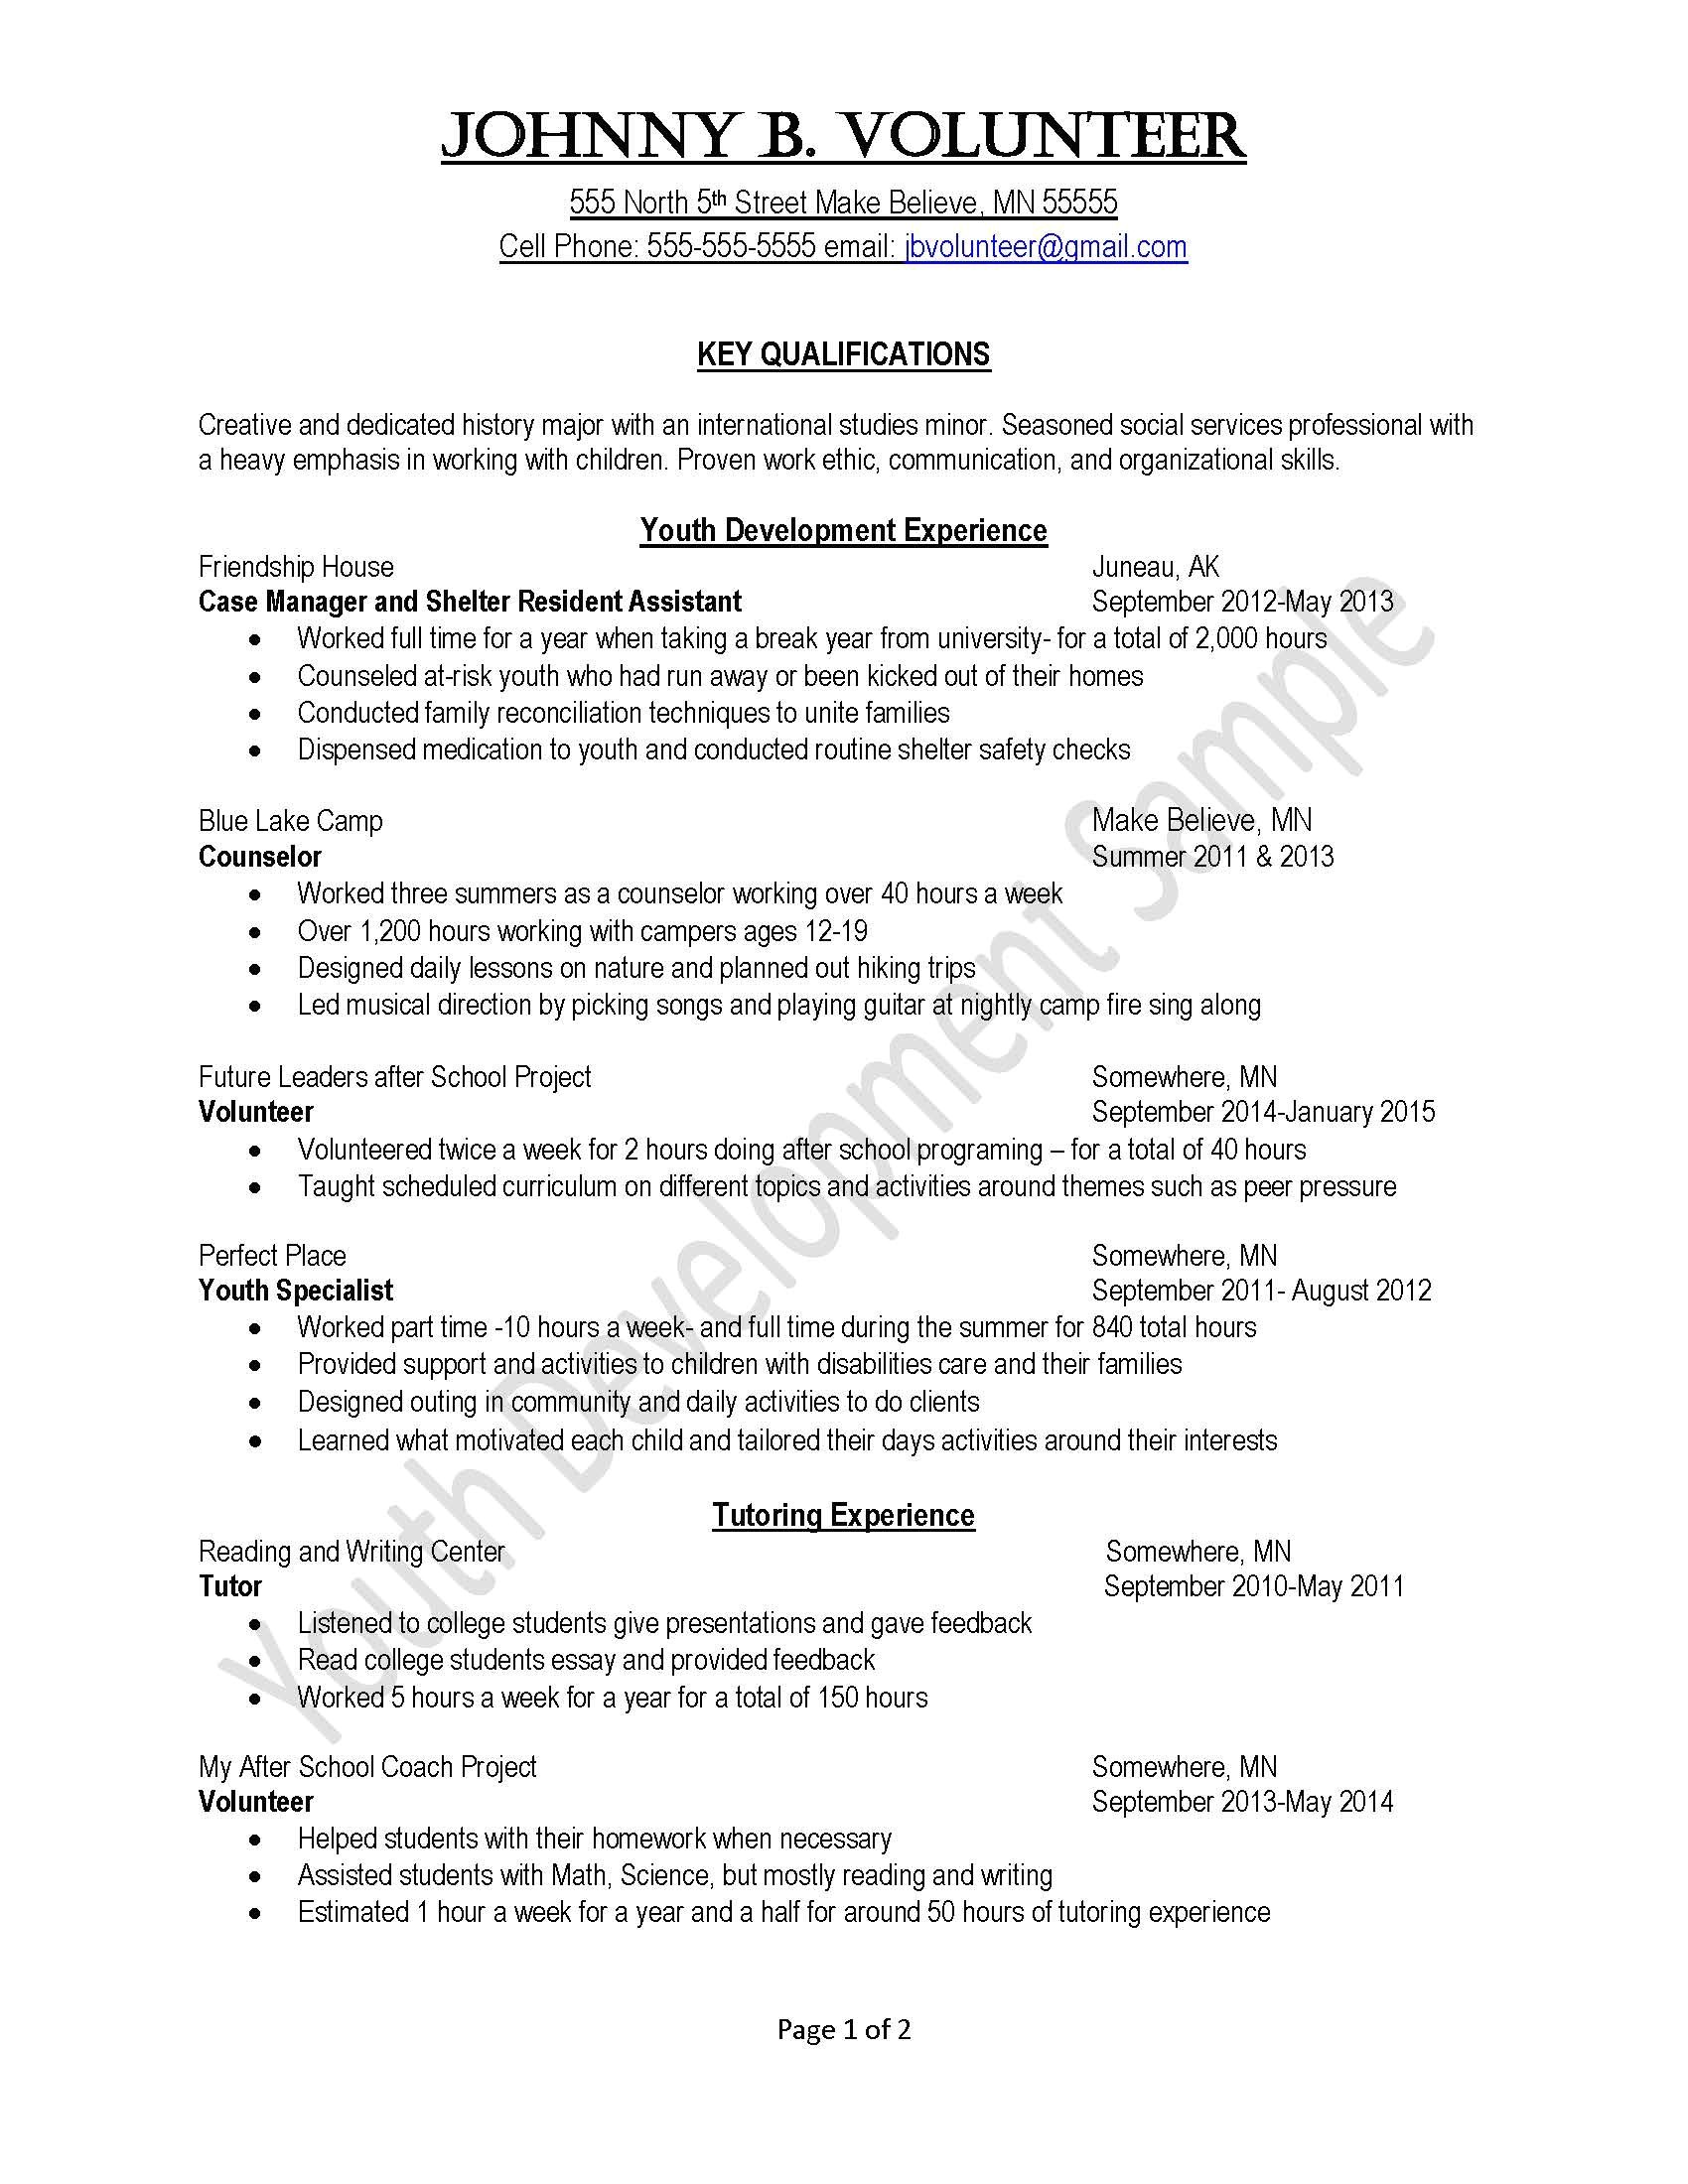 sample resumes for people over 50 14 wonderful ideal resume someone making a career change business insider